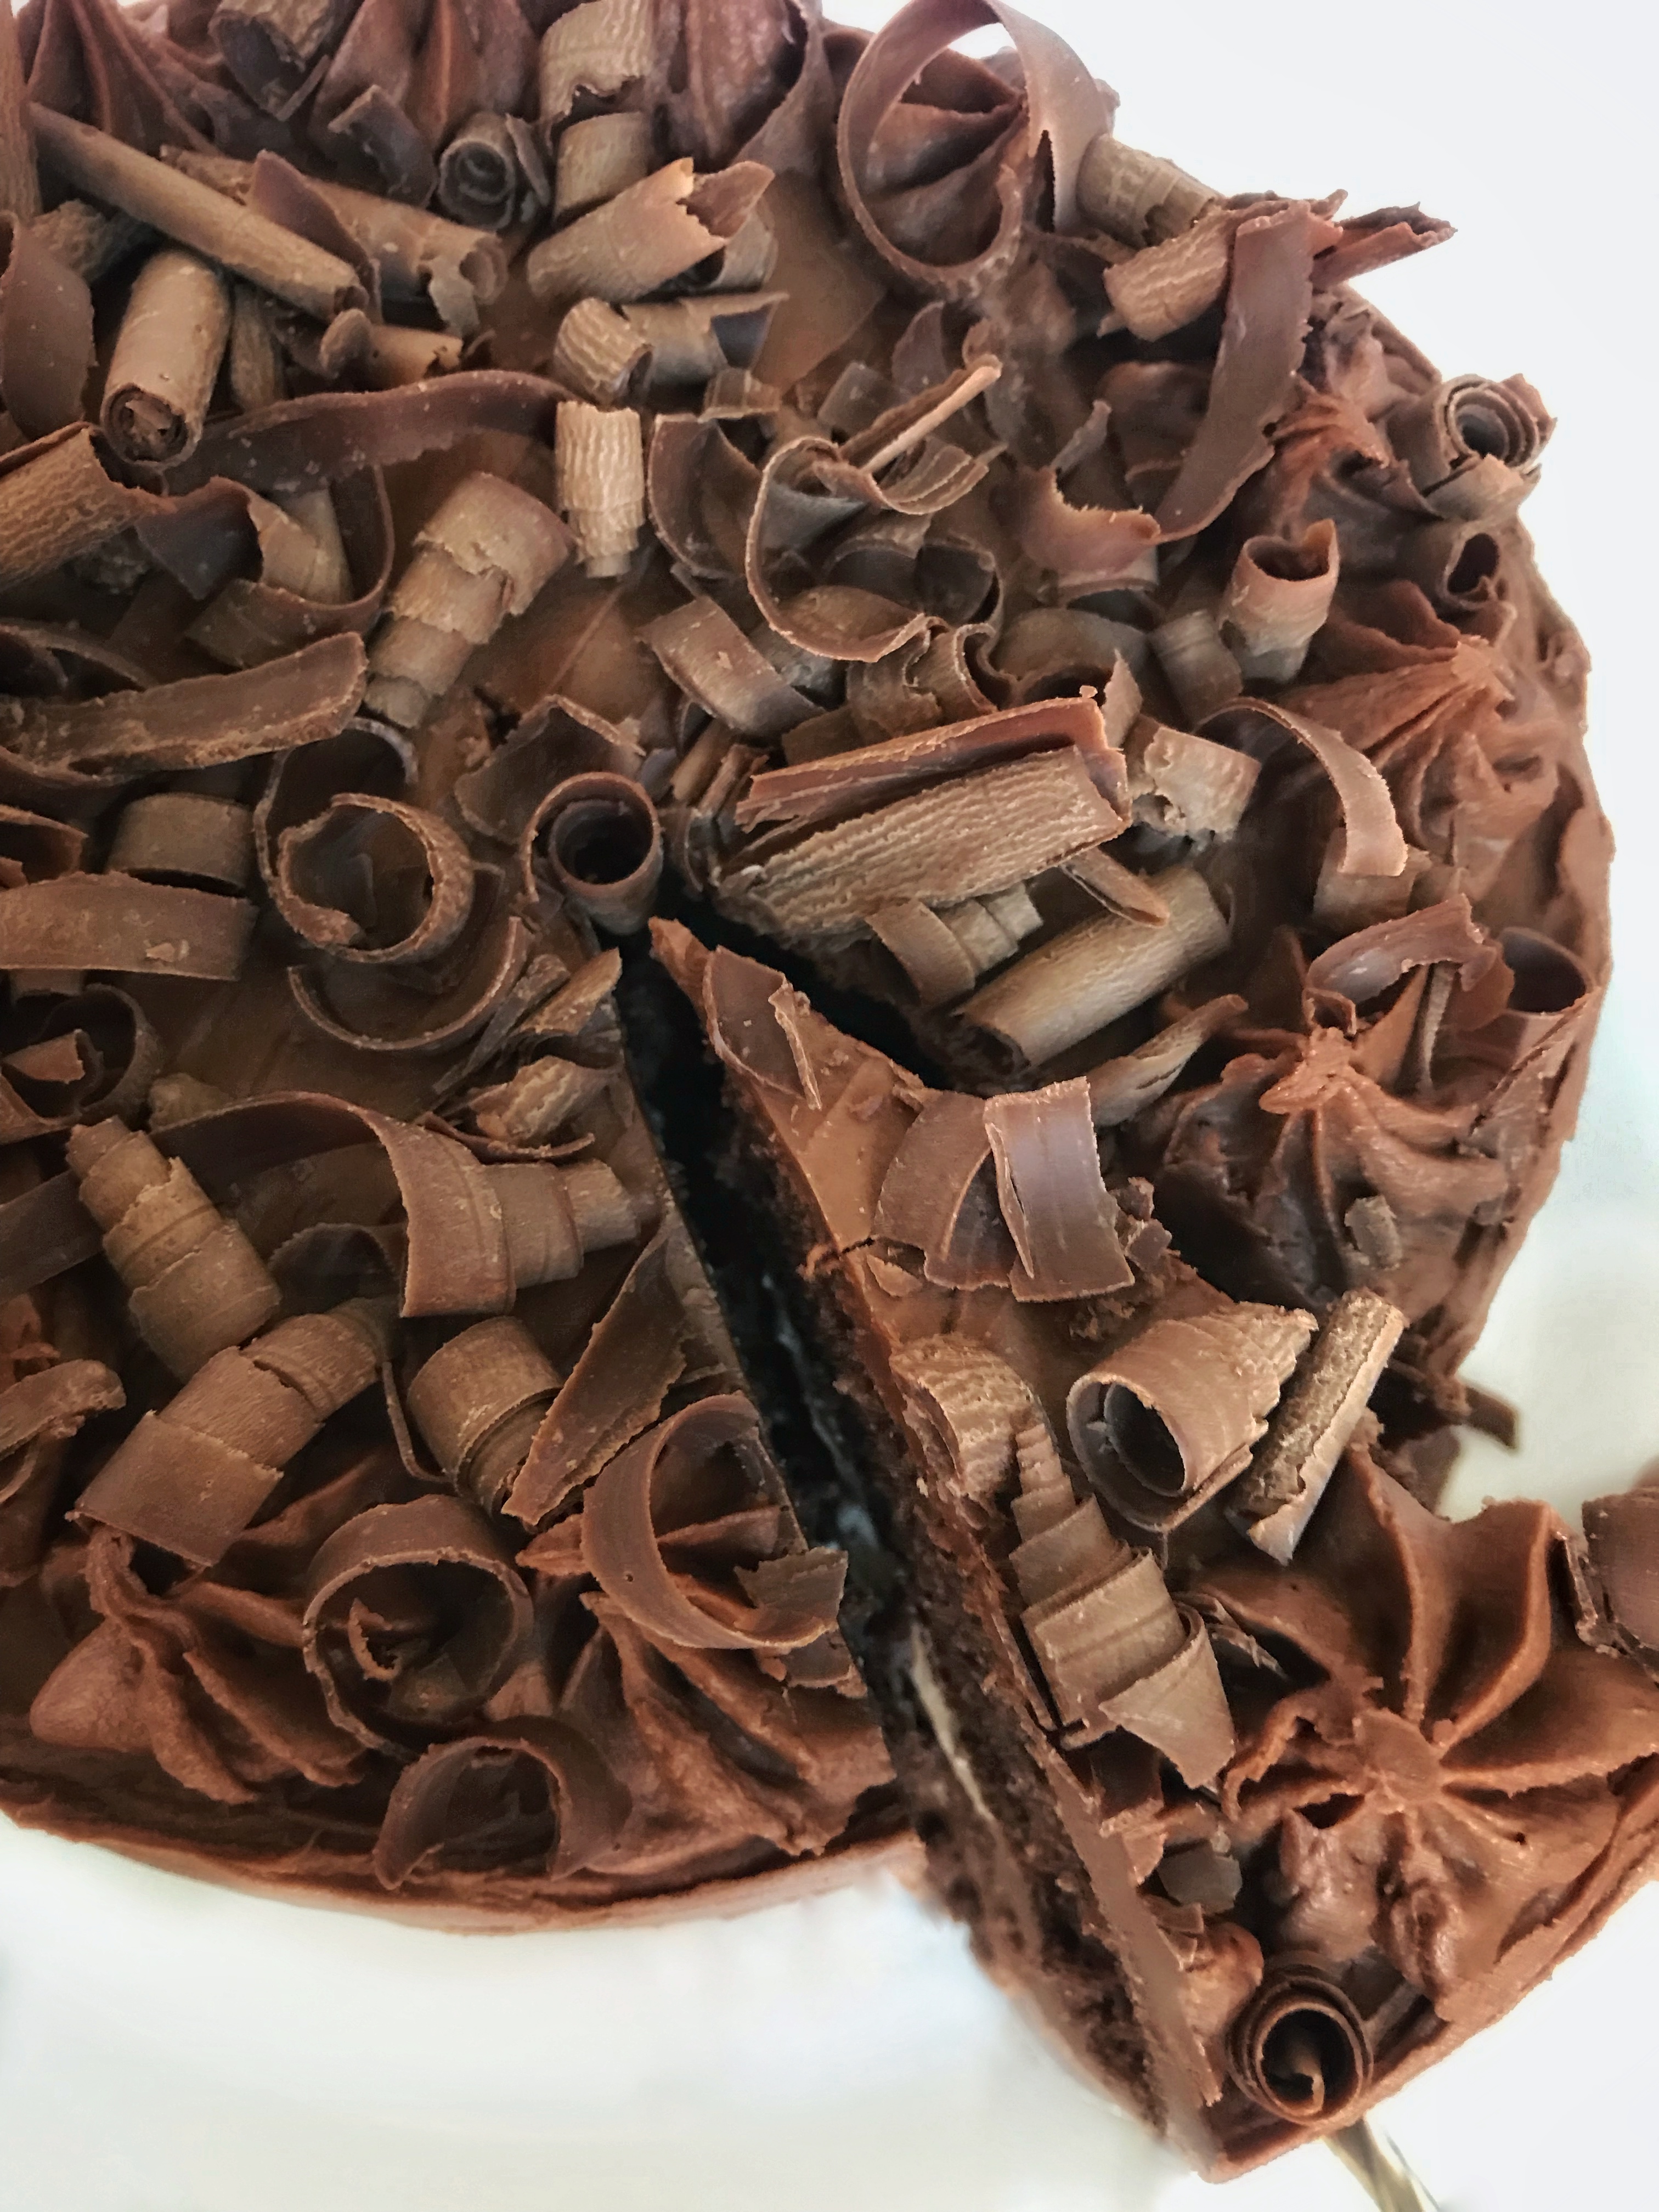 thousands of chocolate curls a top chocolate cake